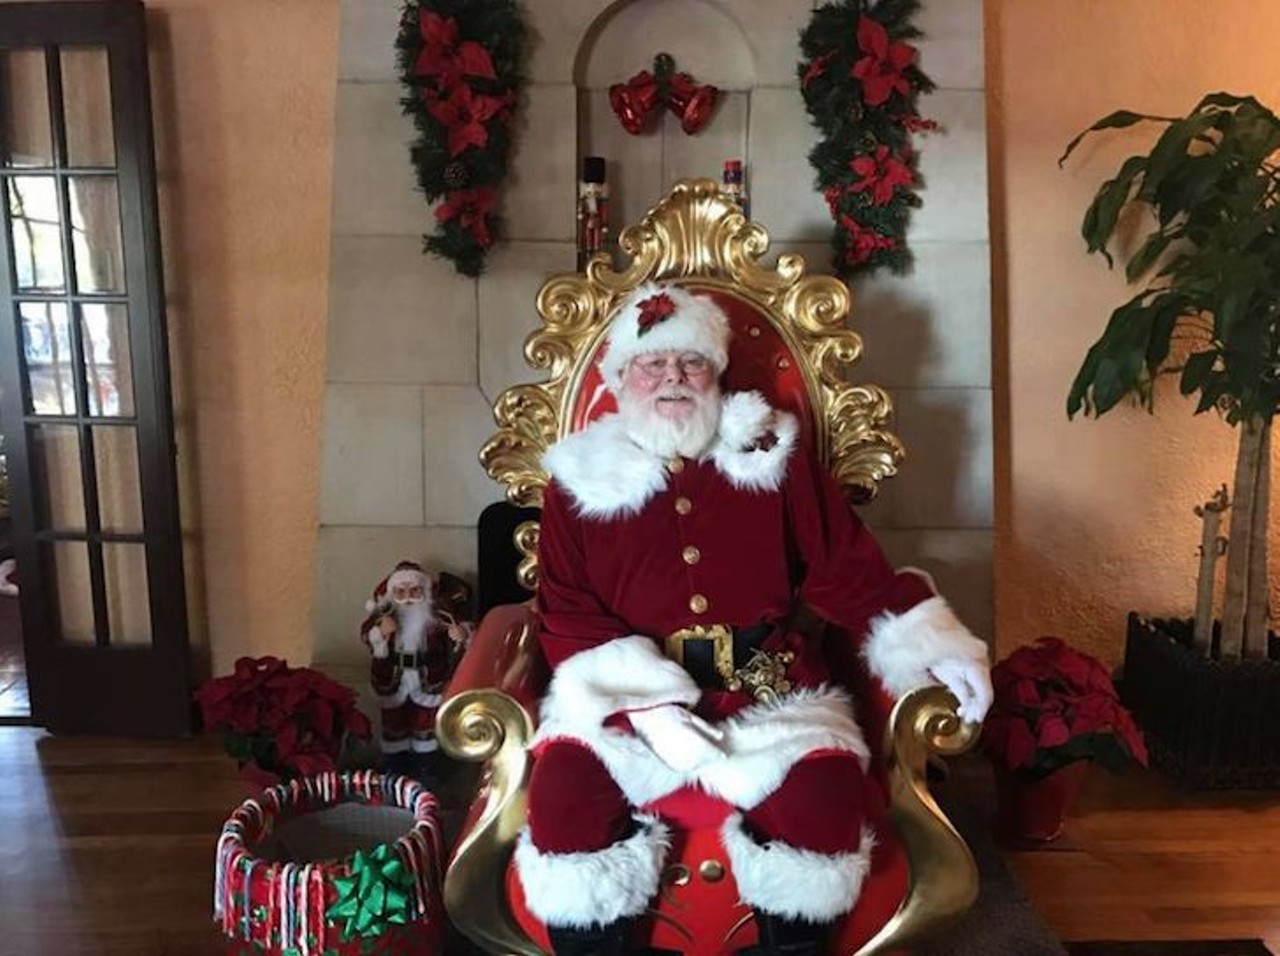 Santa Claus at the Eola House
512 E Washington St; 407-246-4484
Meet and take pictures with Santa Claus at the Eola House in Lake Eola Park every weekend for the entire month of December. Open every Friday-Saturday through Dec. 23. Hours vary.
Photo via Lake Eola Park/Facebook